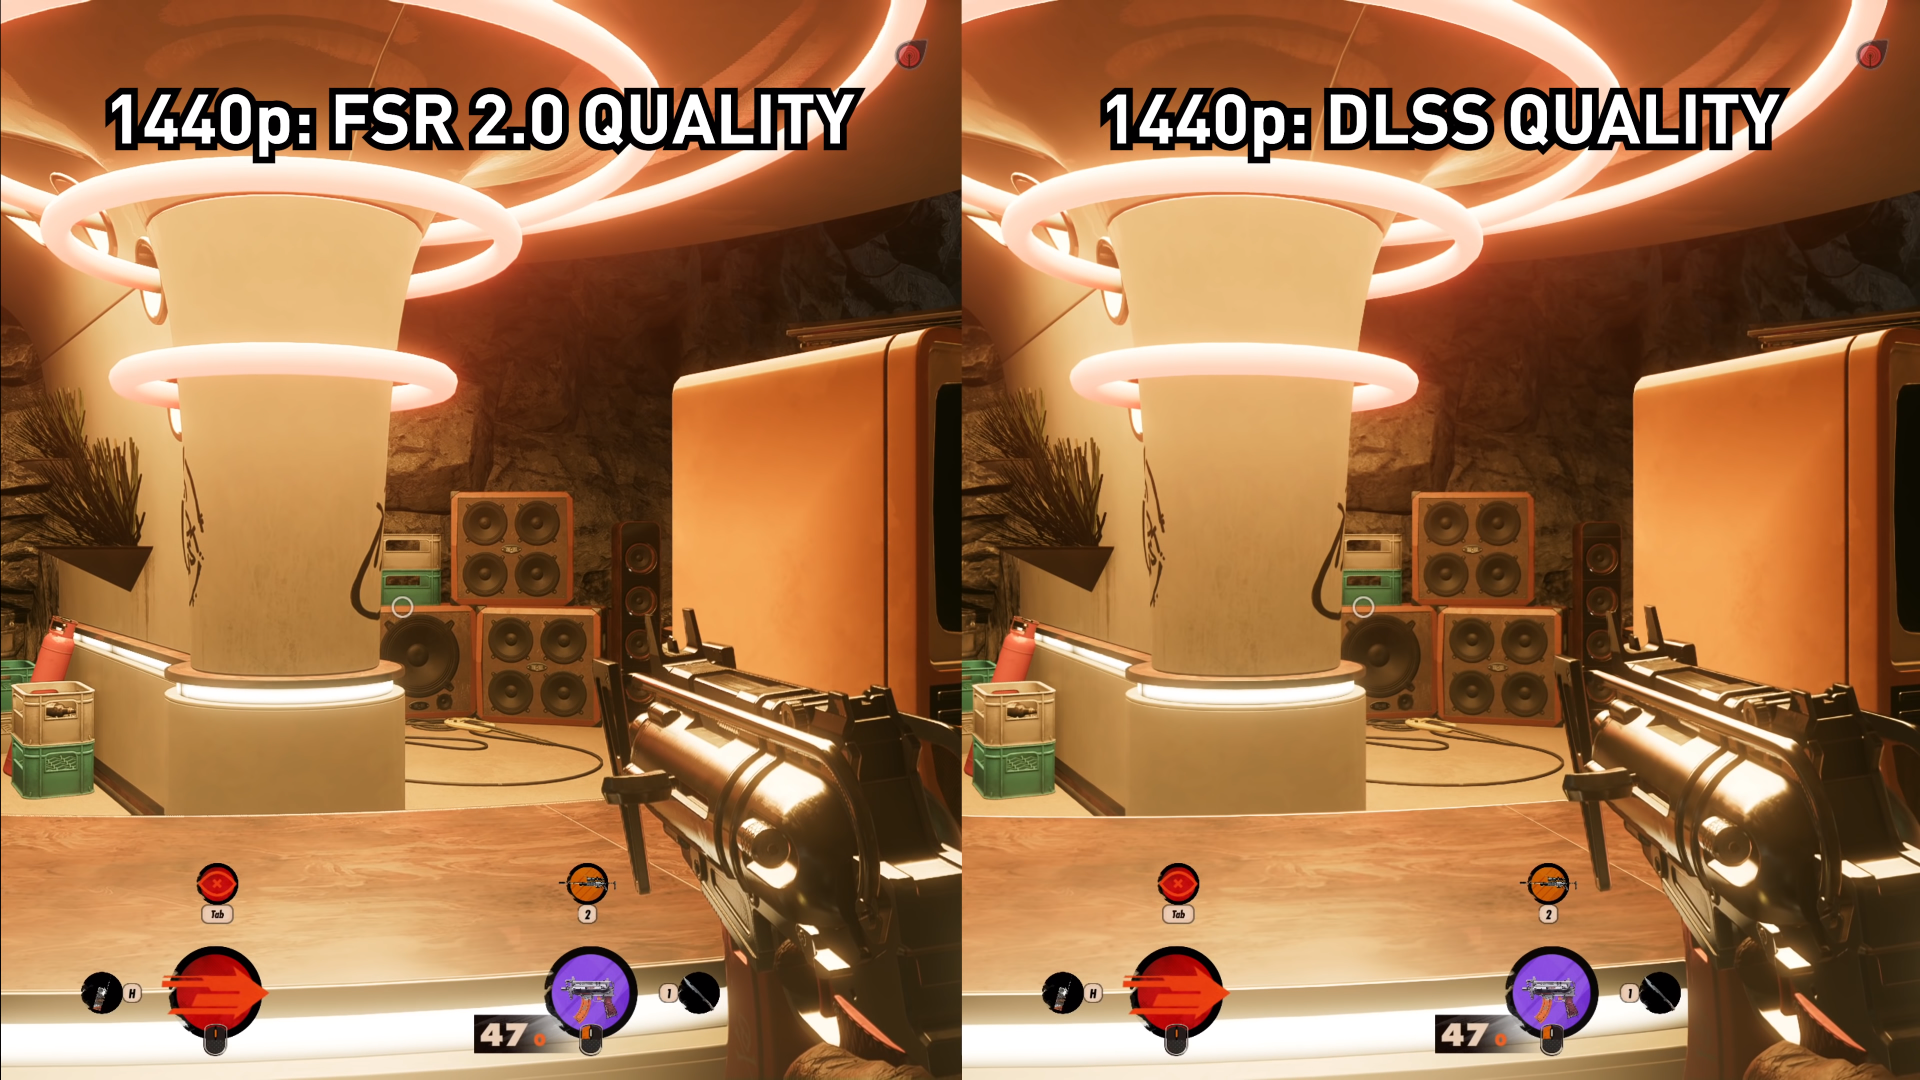 Nvidia DLSS compared to AMD FSR in 1440P Upscaling